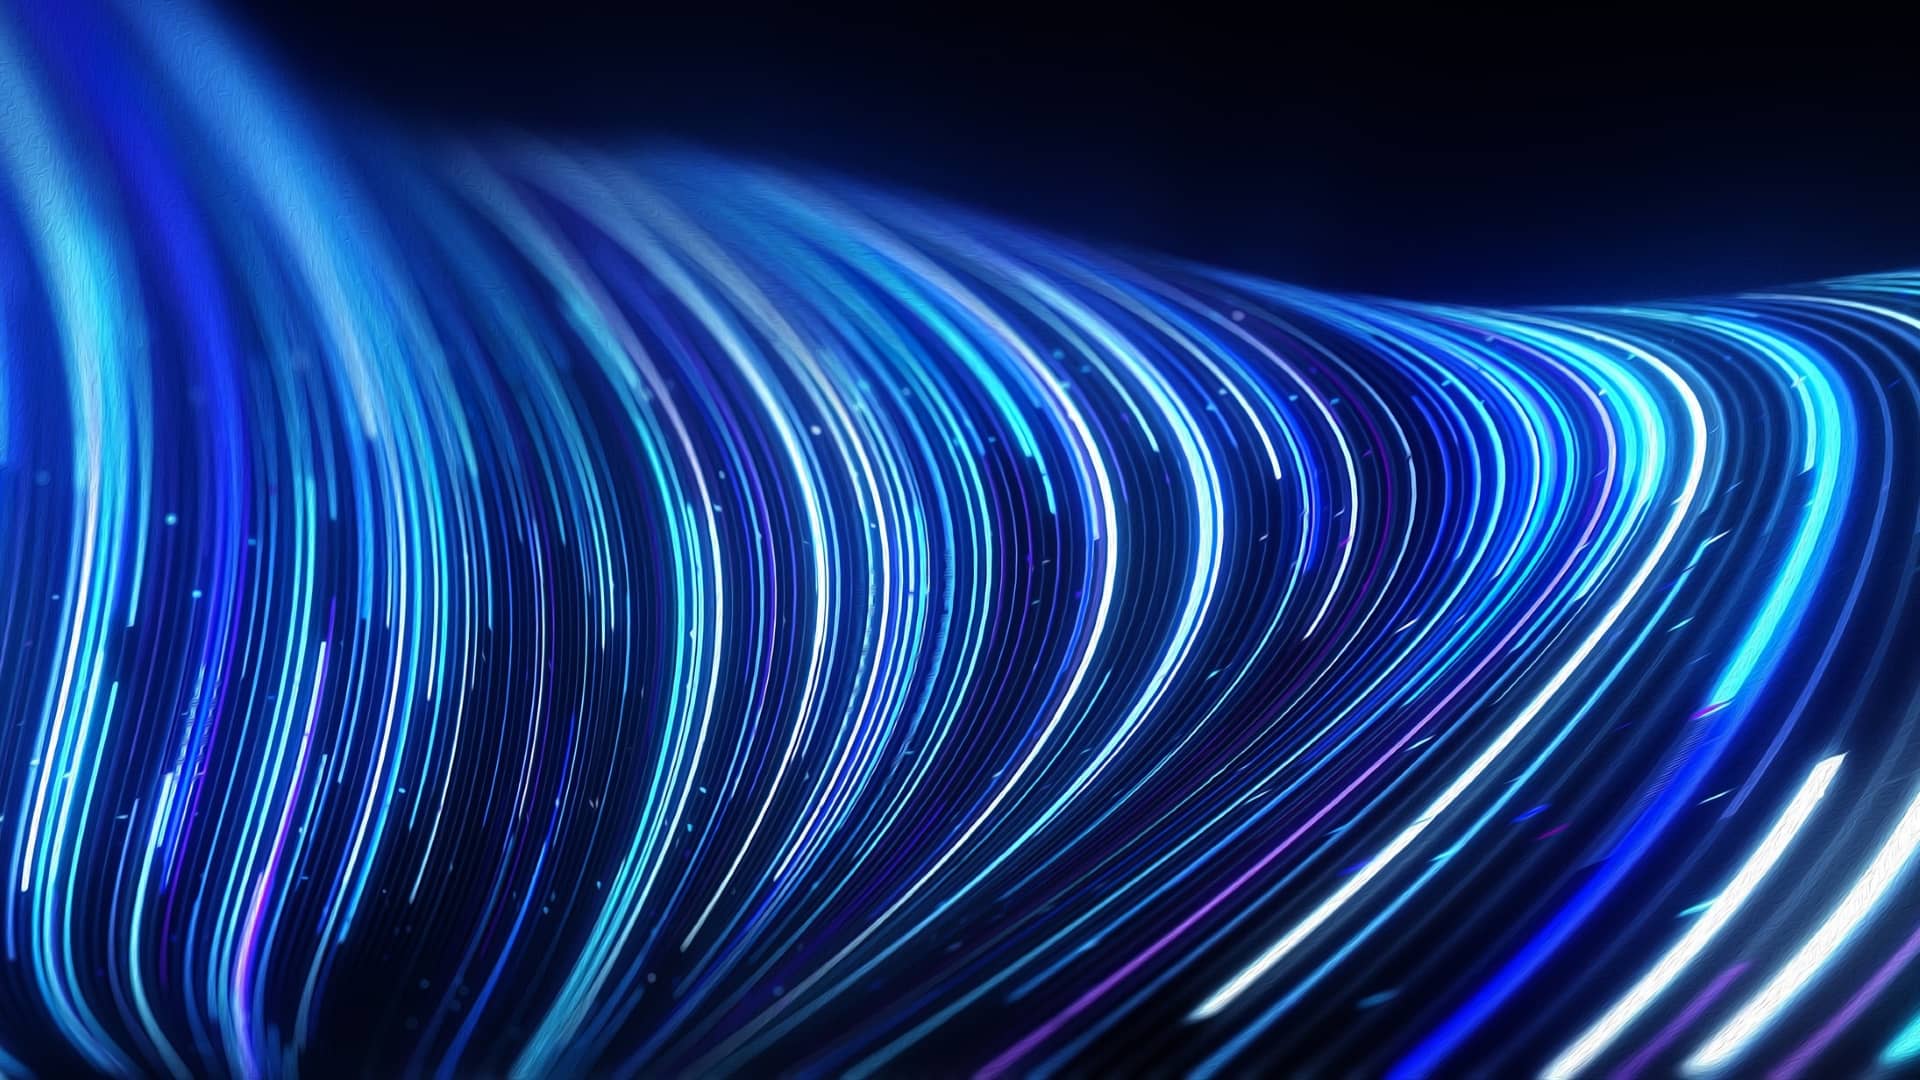 Abstract lines flowing dynamic pattern in blue colors on black background for concept of digital technology.